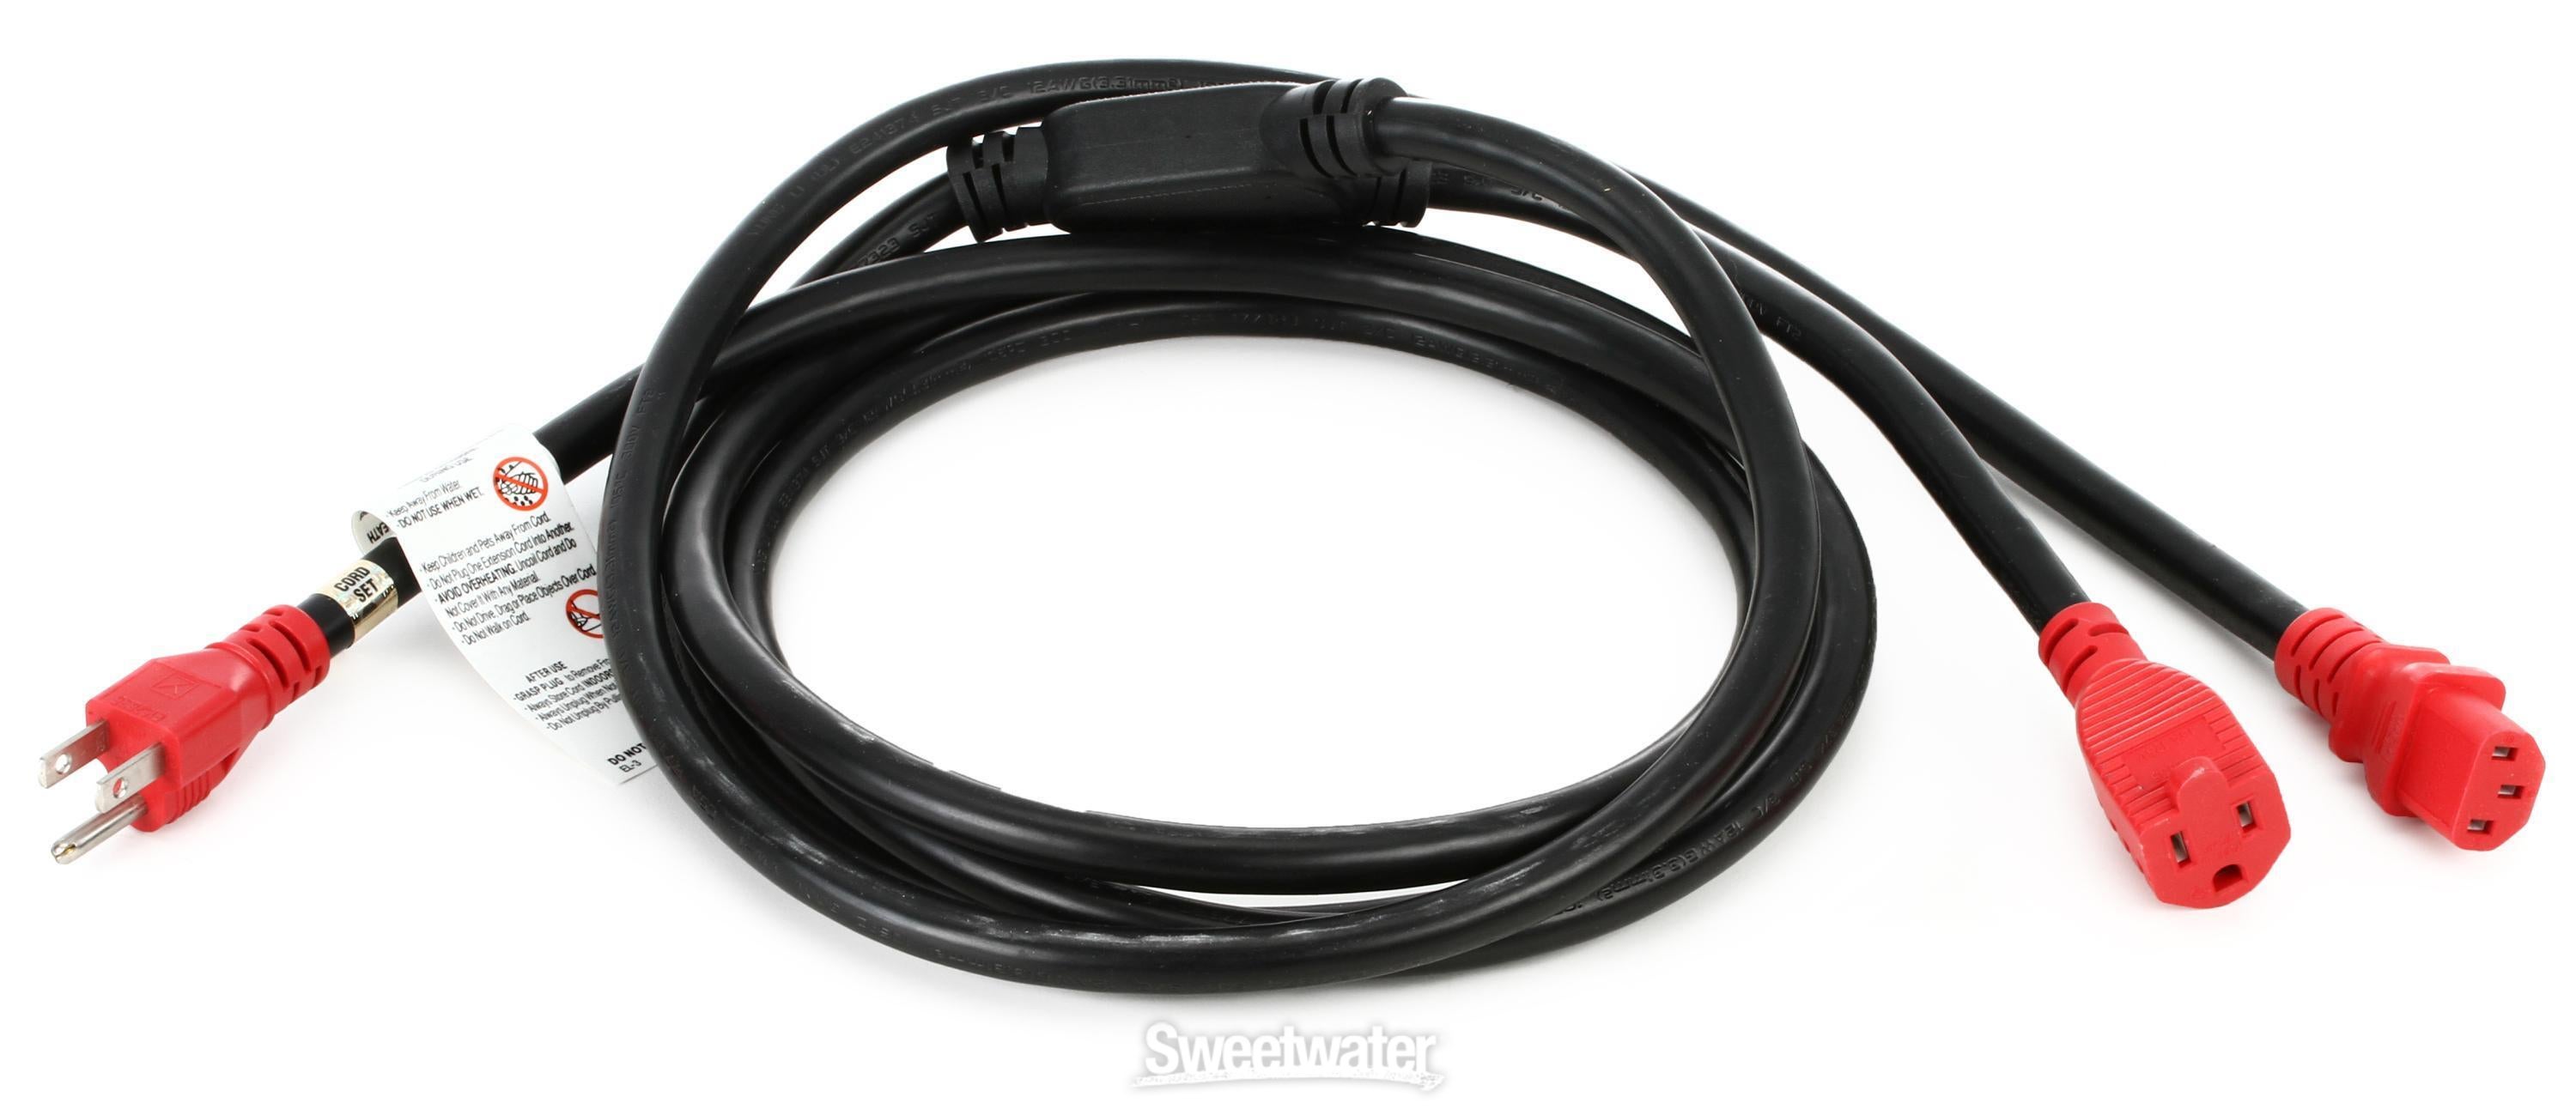 D'Addario PW-IECPB-10 IEC Power Cable+ with NEMA 5-15R Outlet - 10